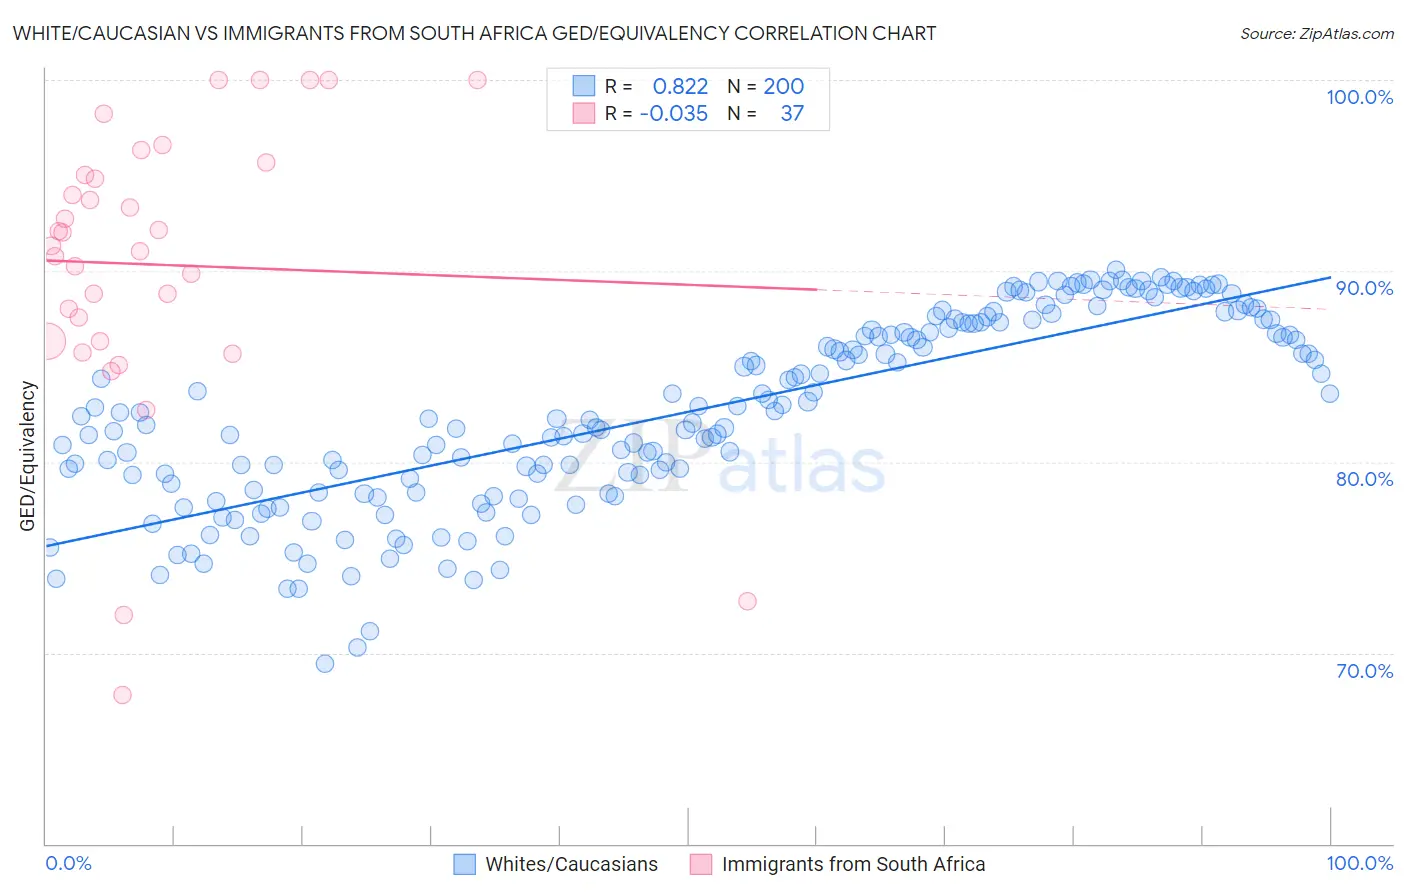 White/Caucasian vs Immigrants from South Africa GED/Equivalency